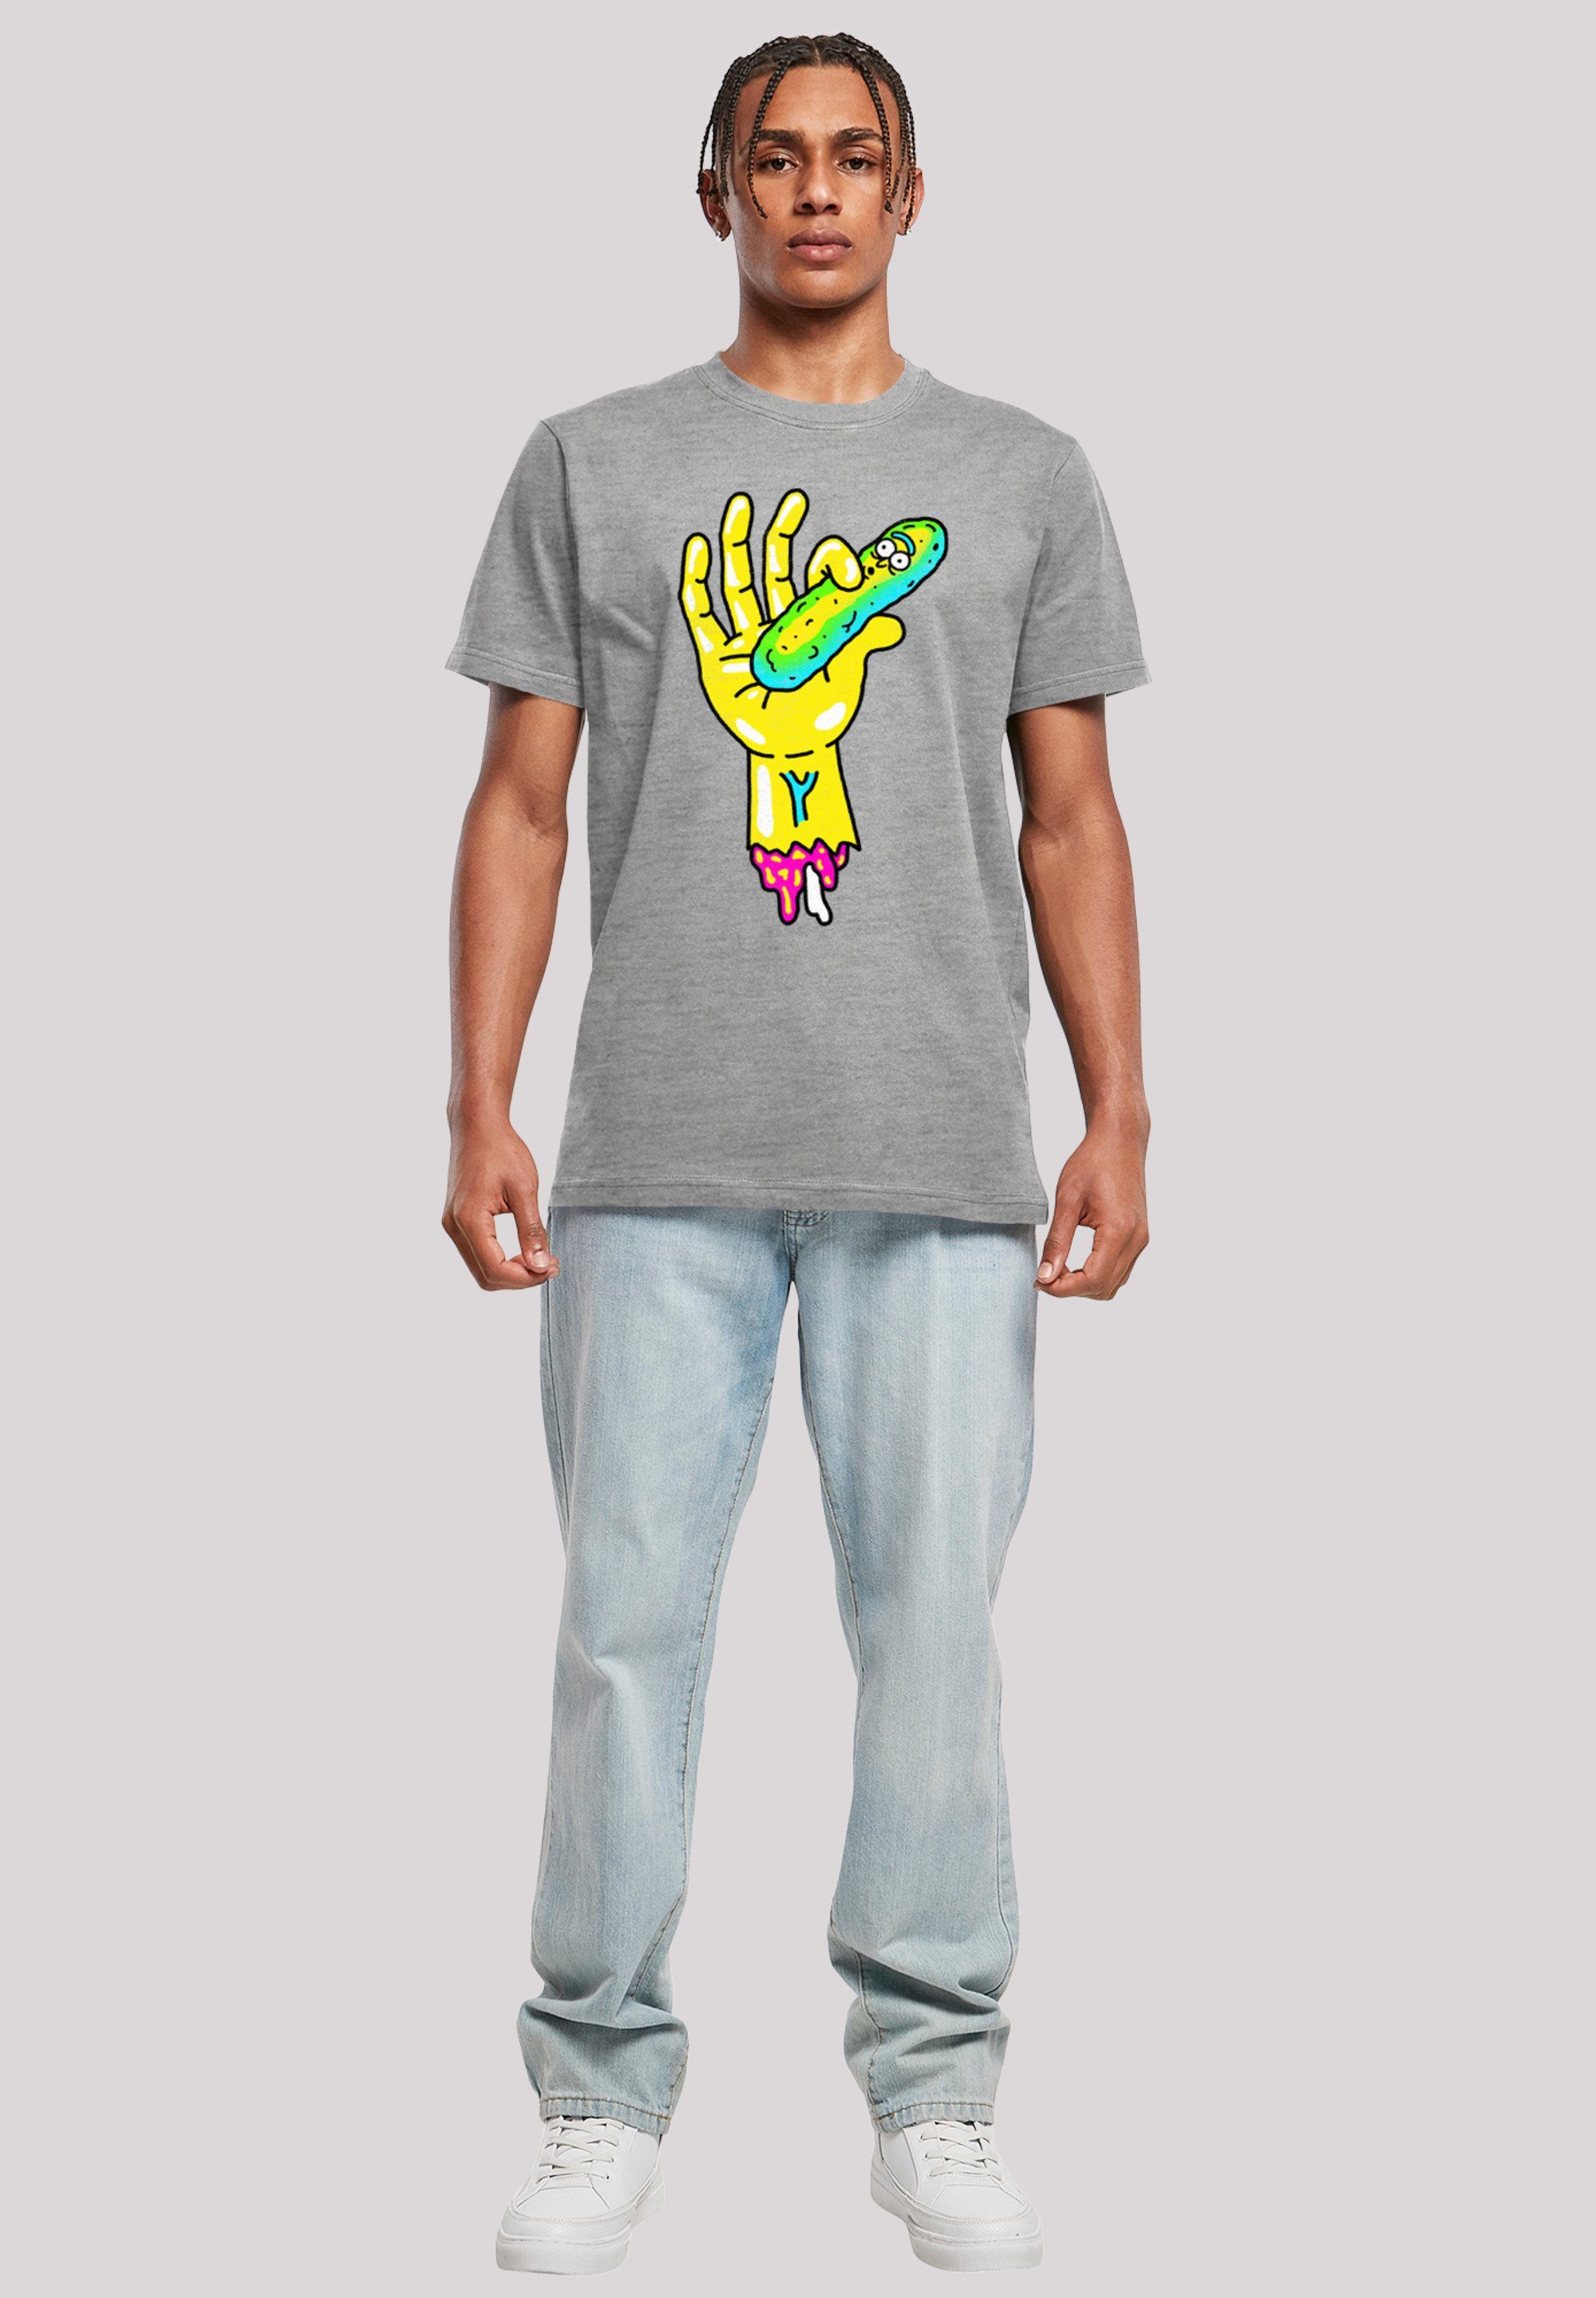 F4NT4STIC T-Shirt Print Pickle Rick heather Hand and grey Morty